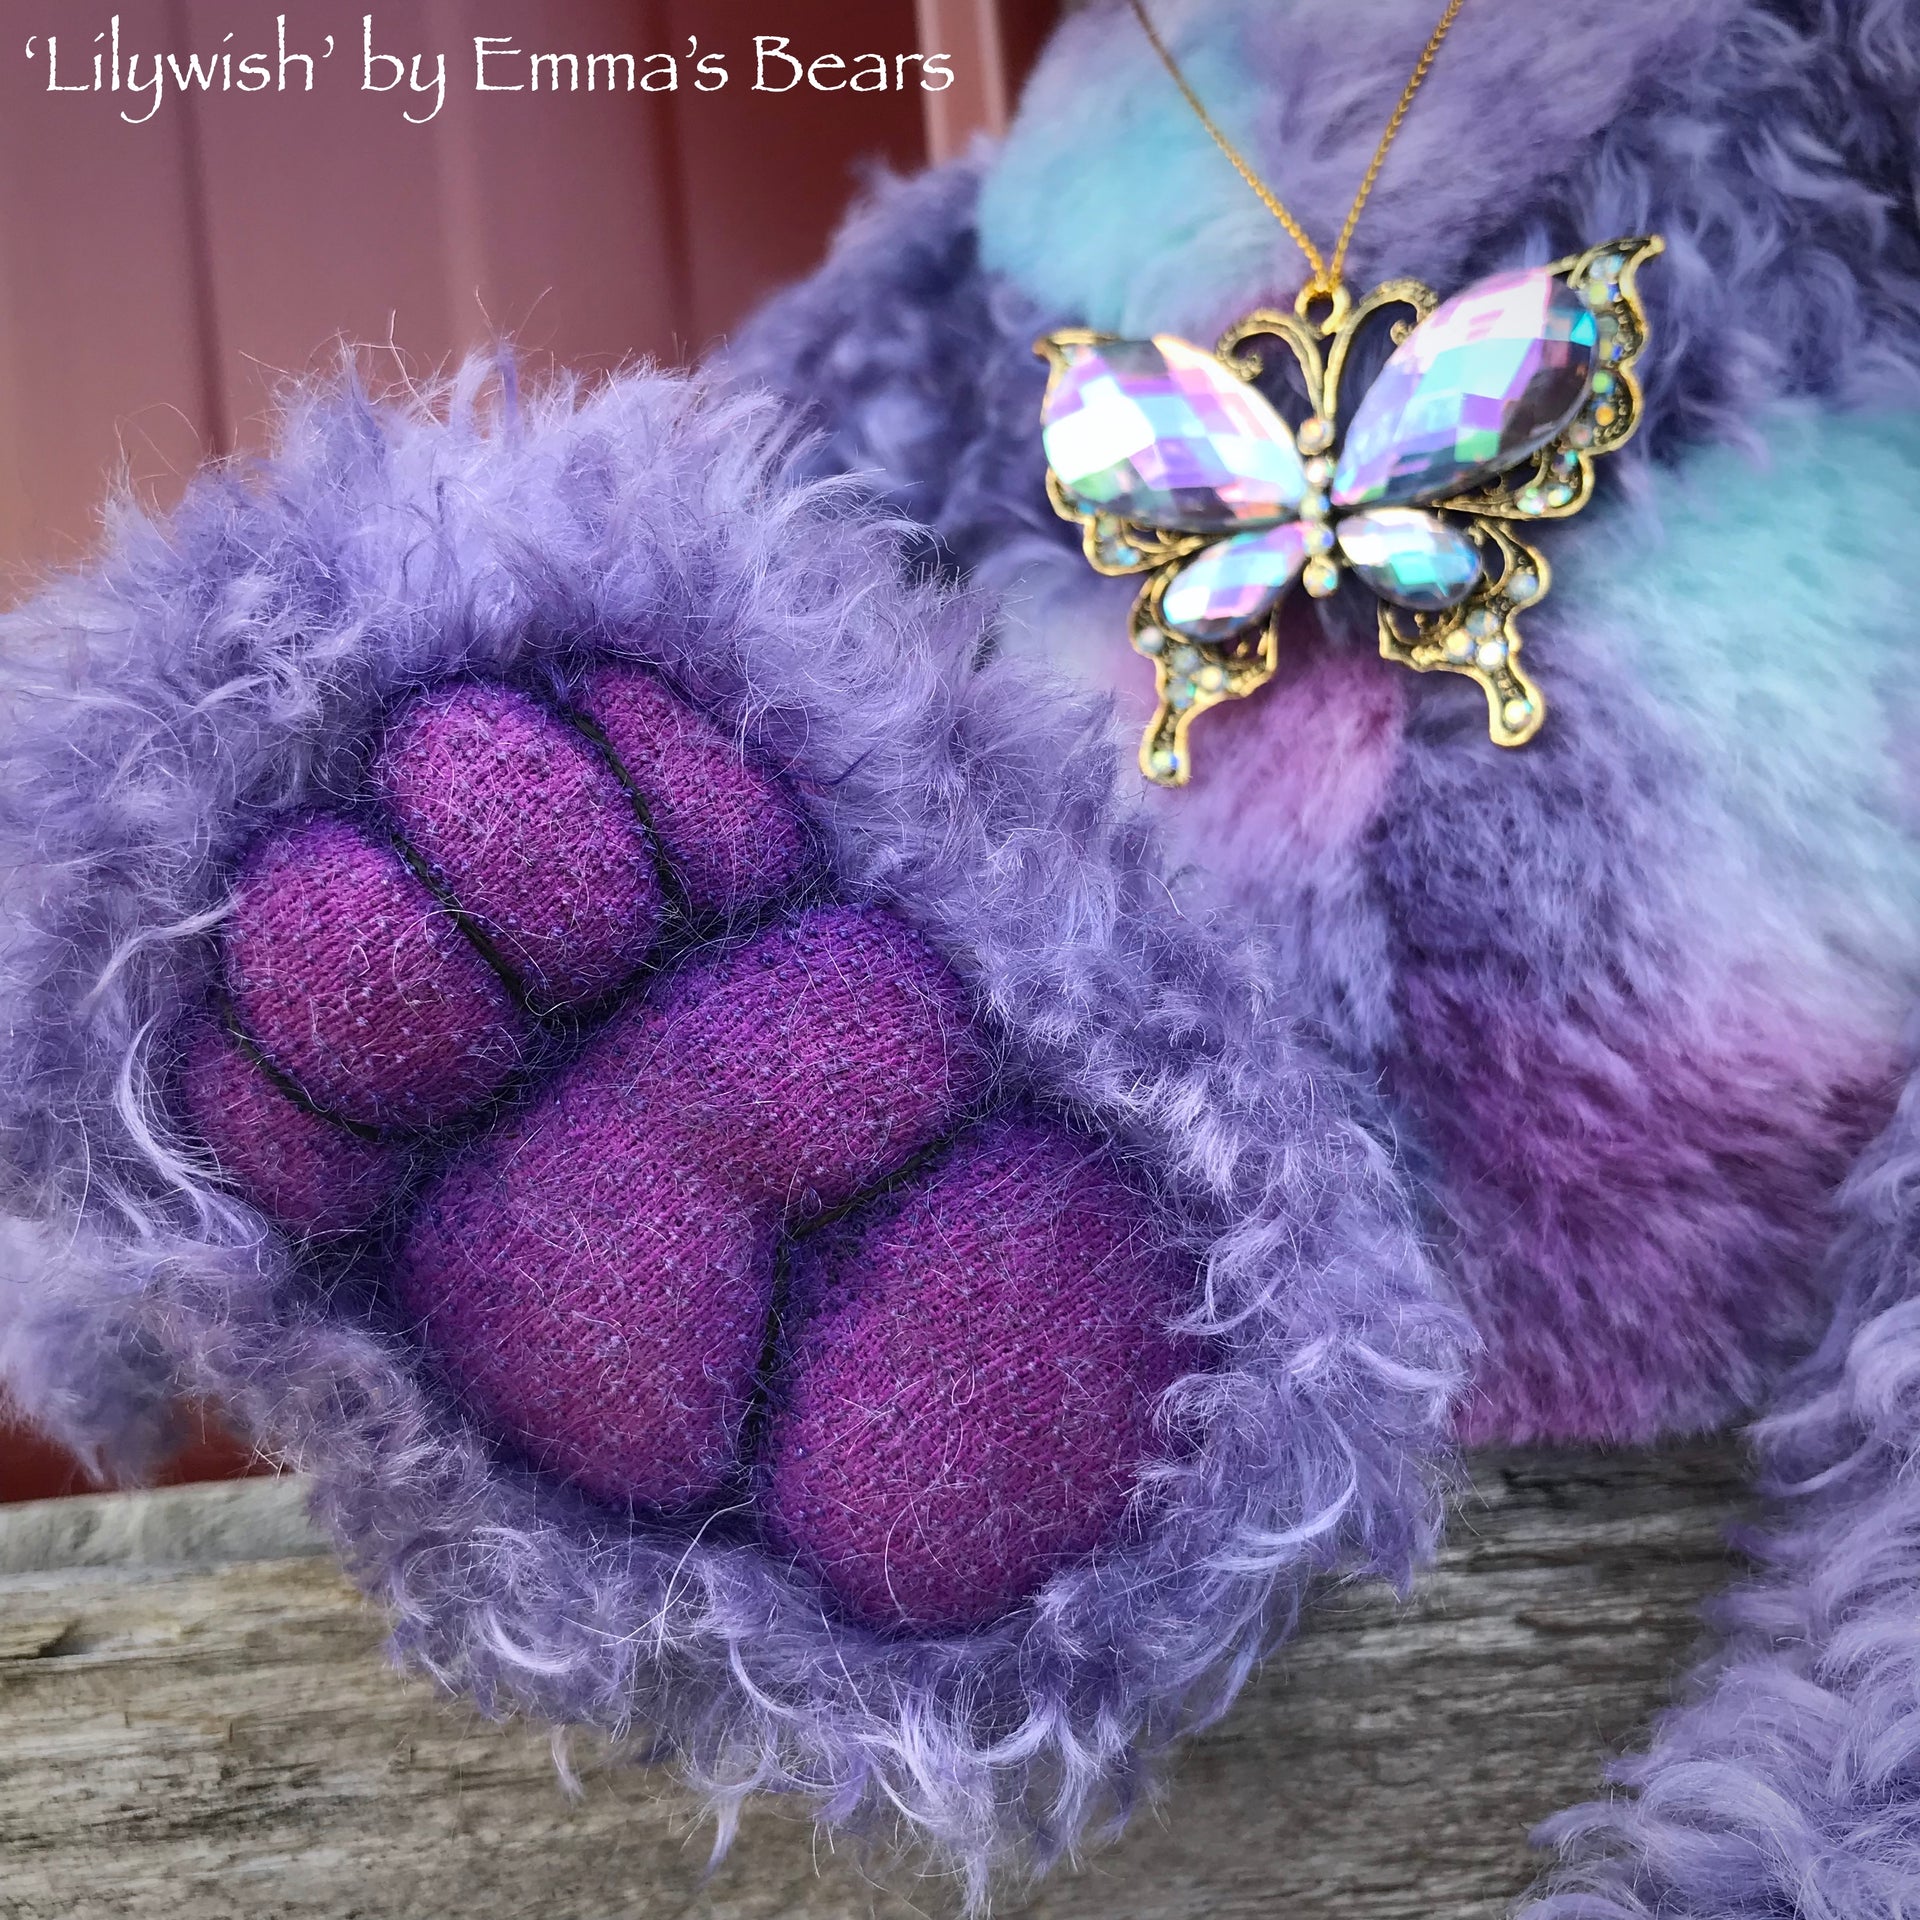 Lilywish - 18" Hand-dyed Mohair and Alpaca Artist Bear by Emma's Bears - OOAK